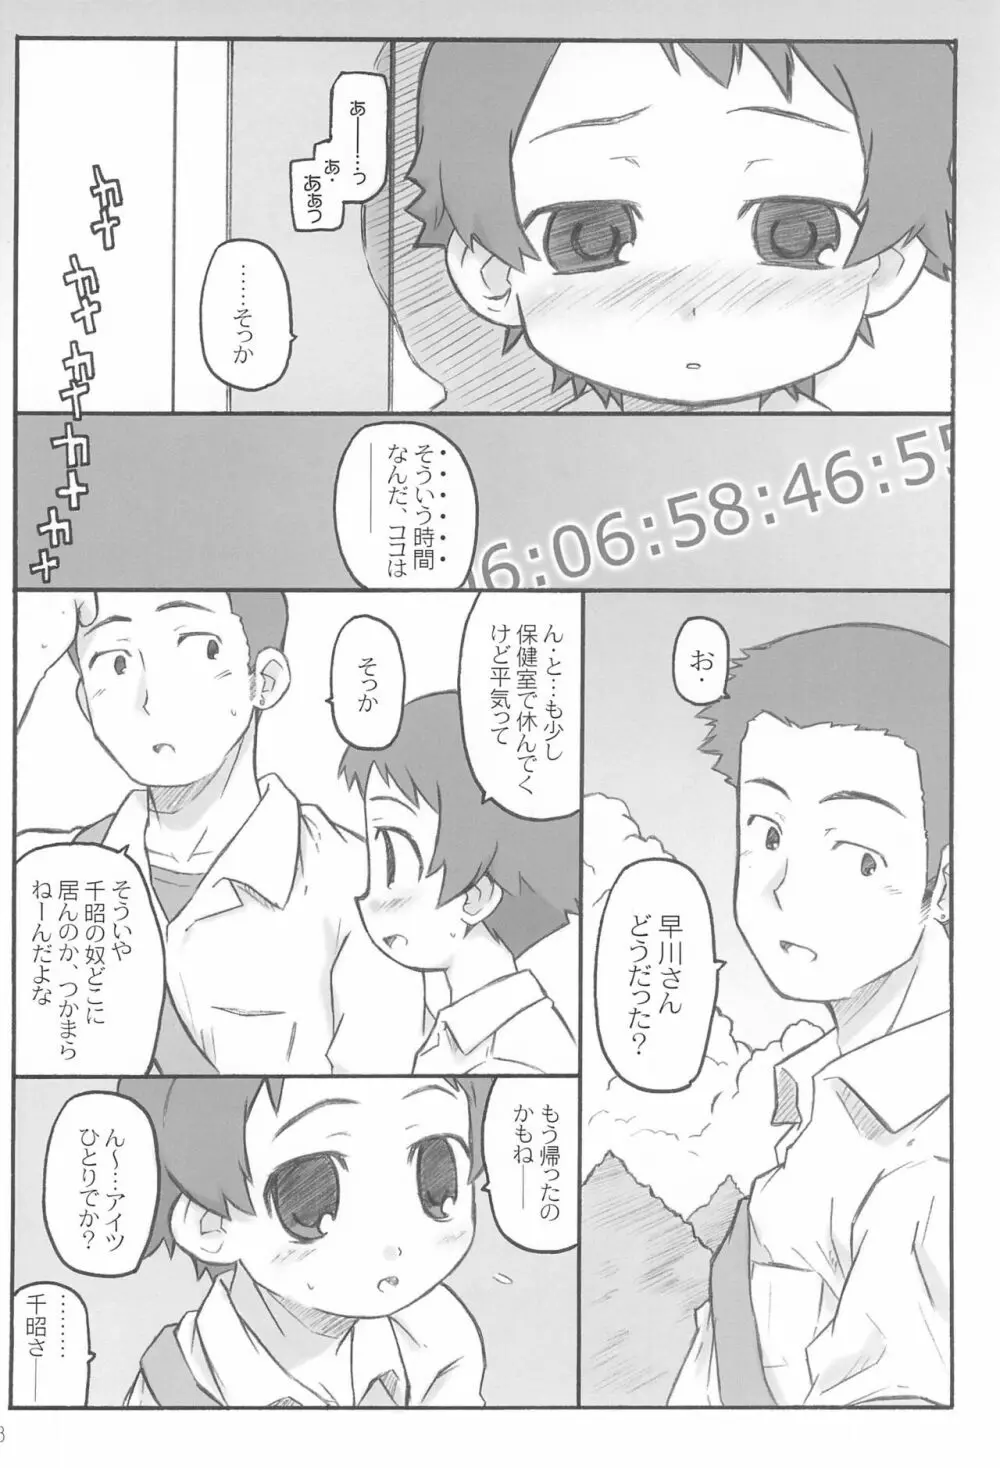 TIME - page8